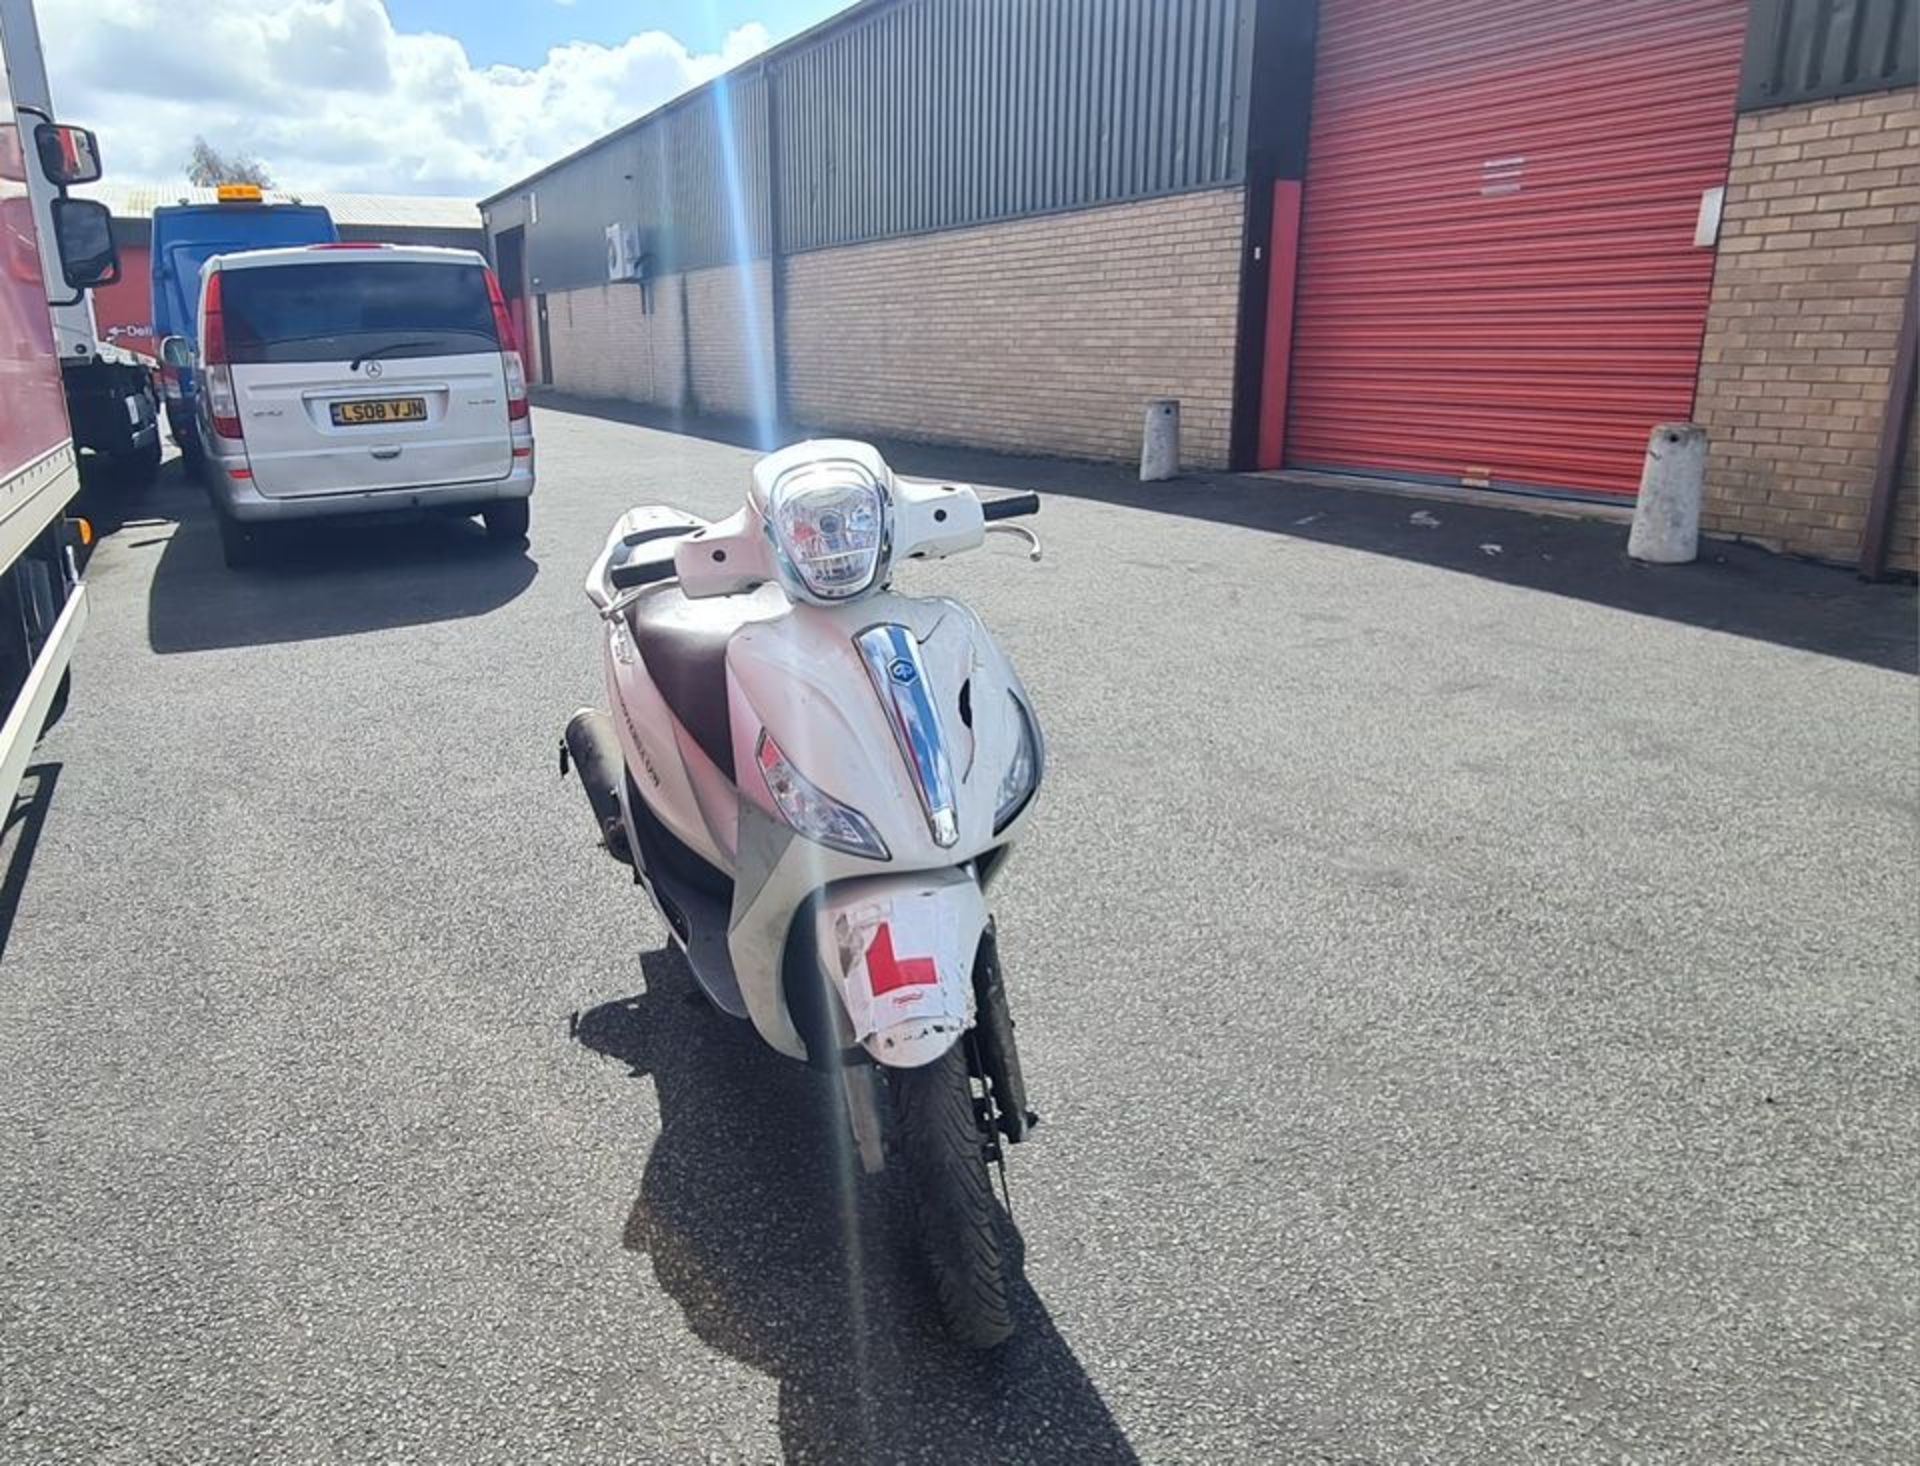 2016 Piaggio Medley 125 Scooter - Missing Key - Image 11 of 13